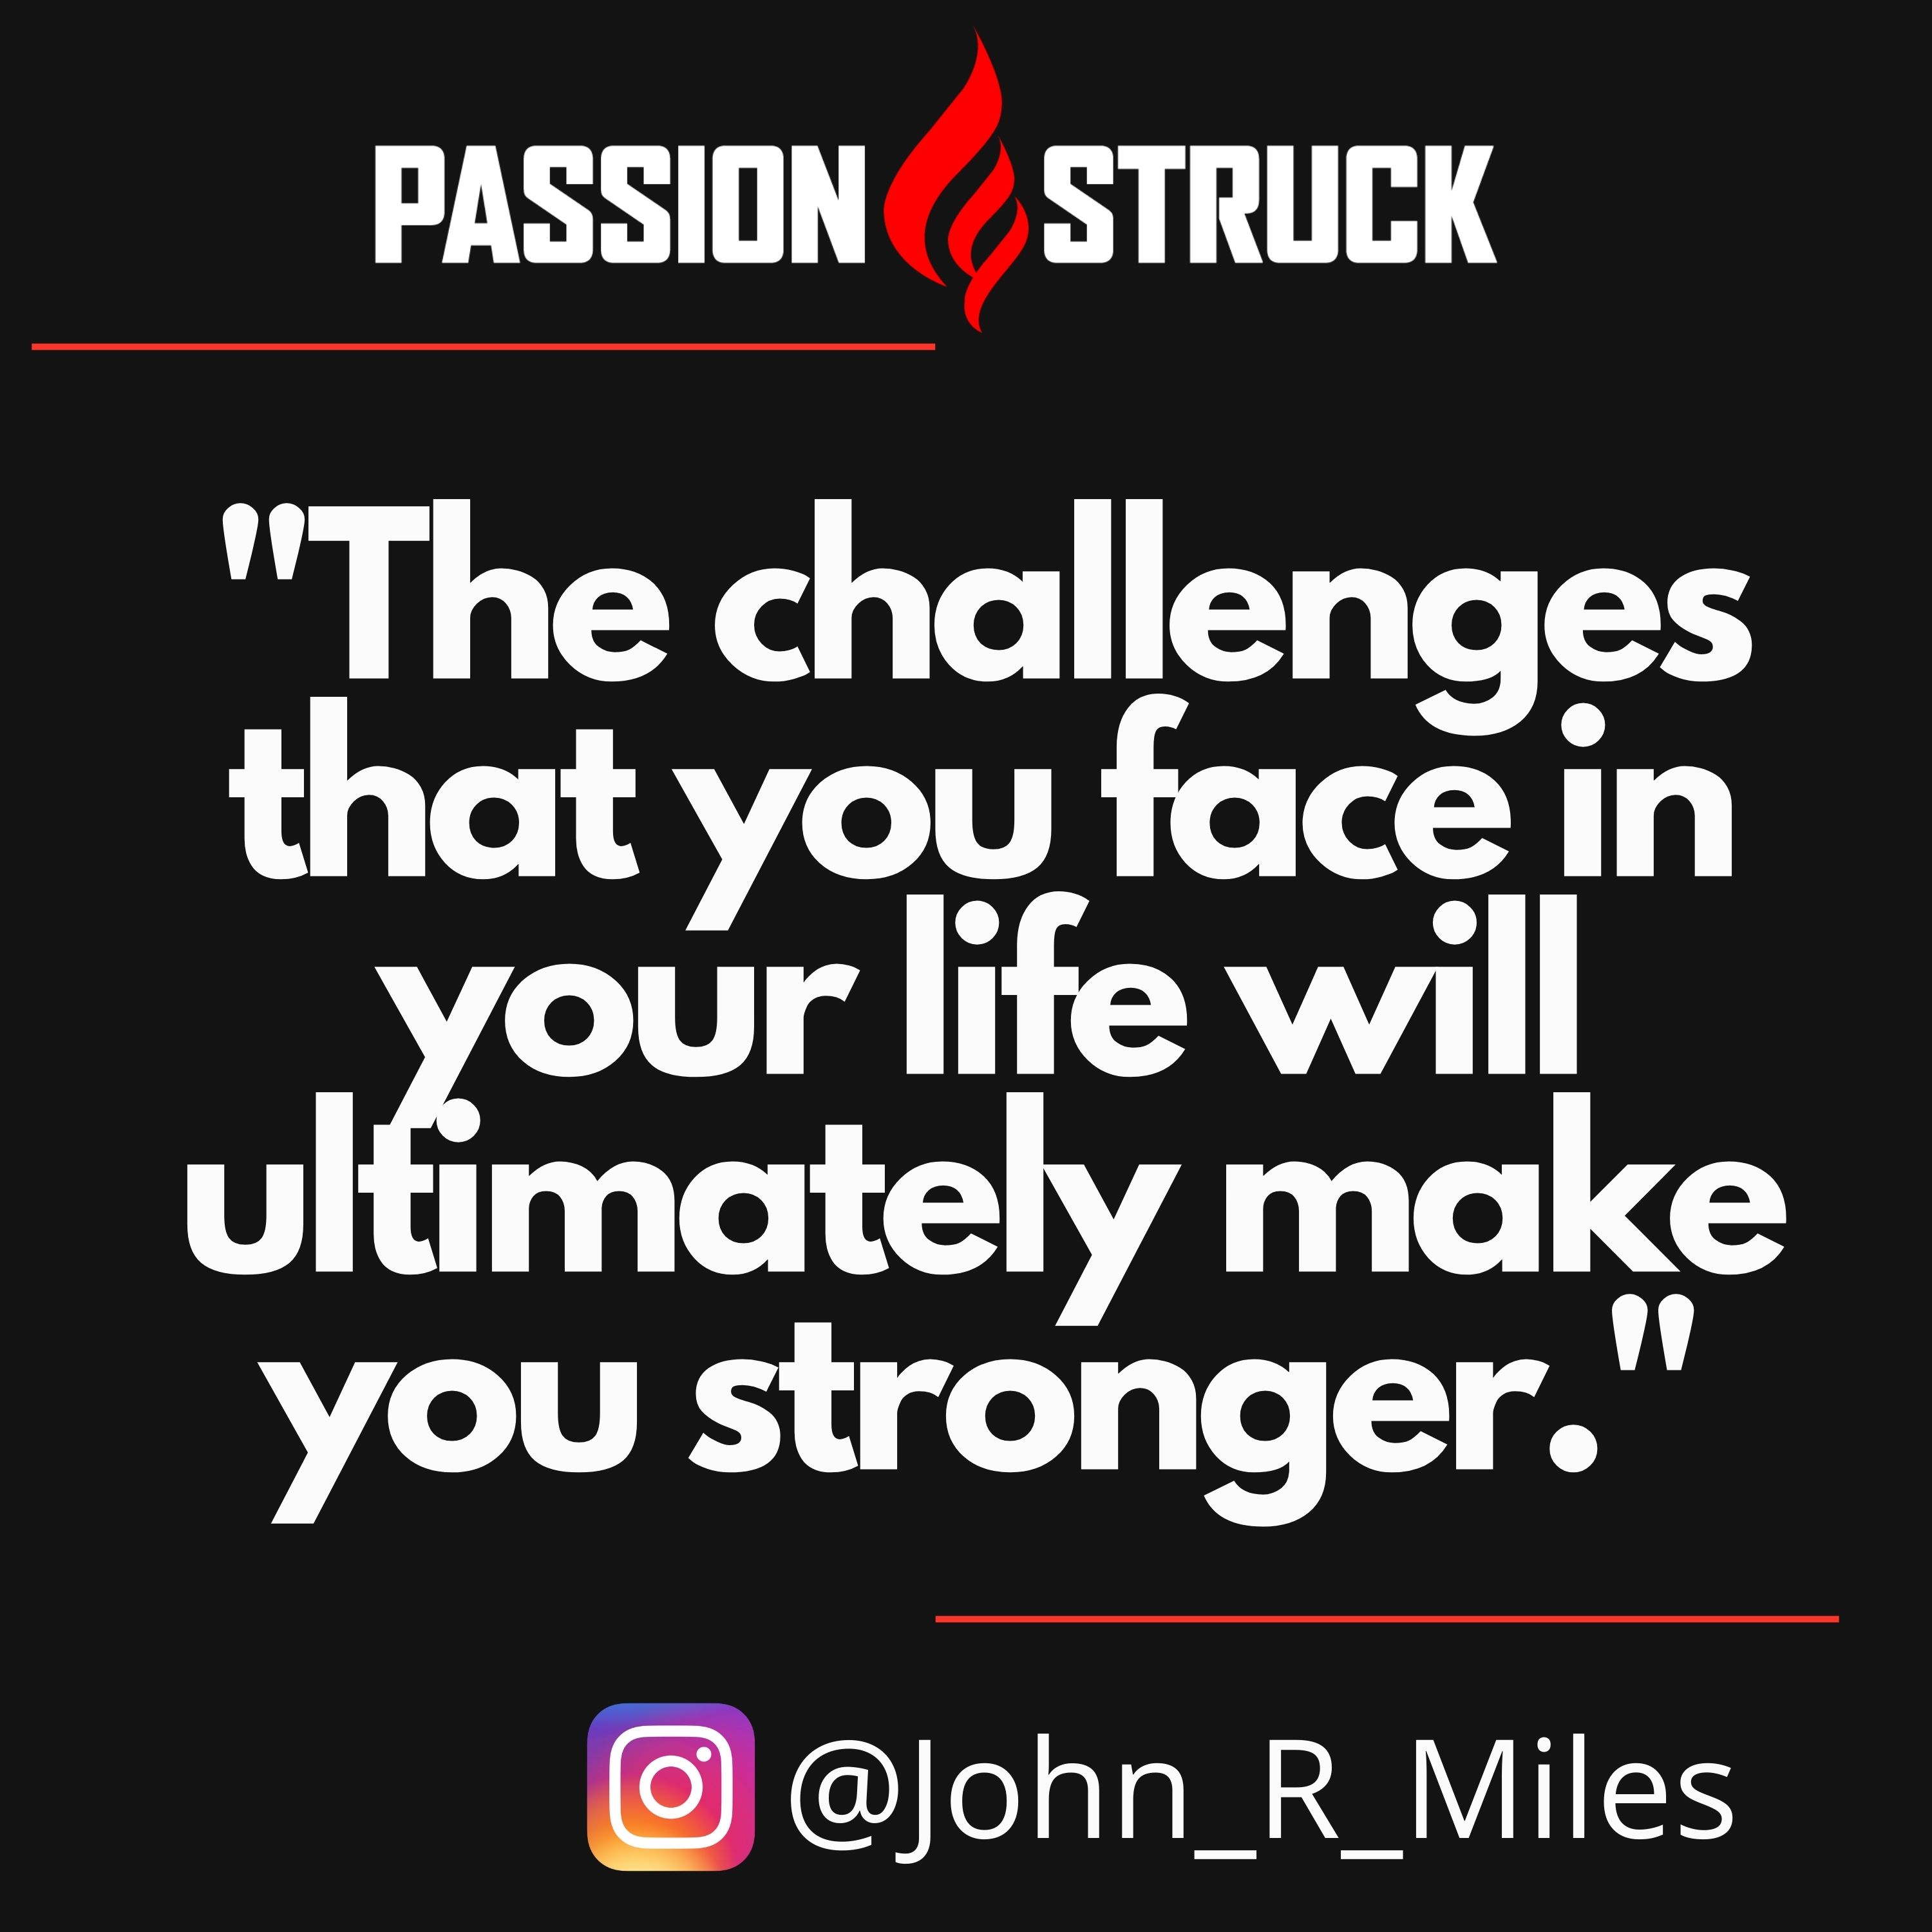 Quote from John R. Miles on ways to build resilience for Passion Struck Podcast